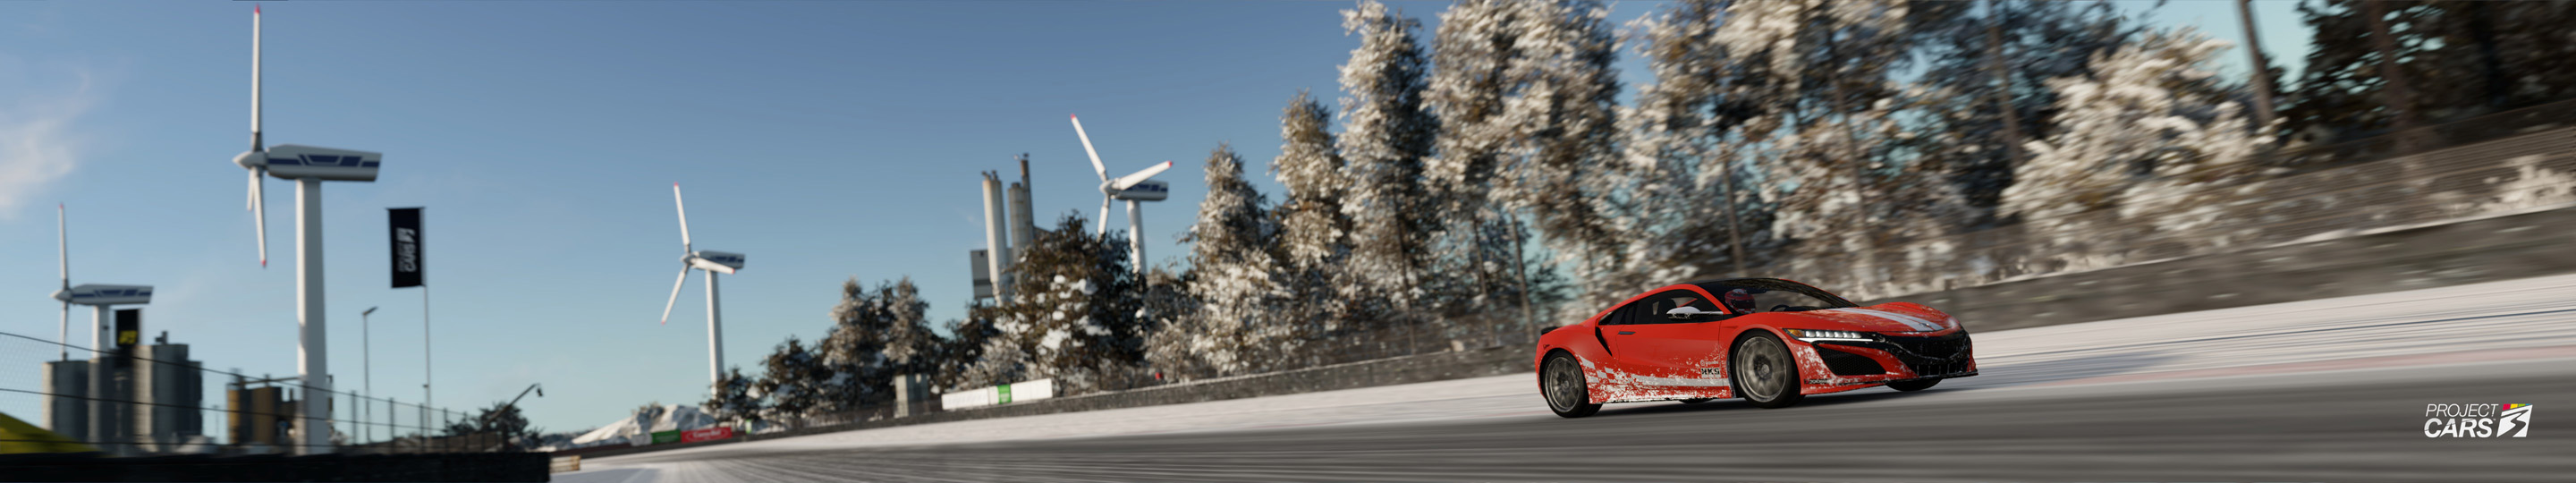 0 PROJECT CARS 3 ACURA NSX 2020 at ZOLDER Snow copy.jpg